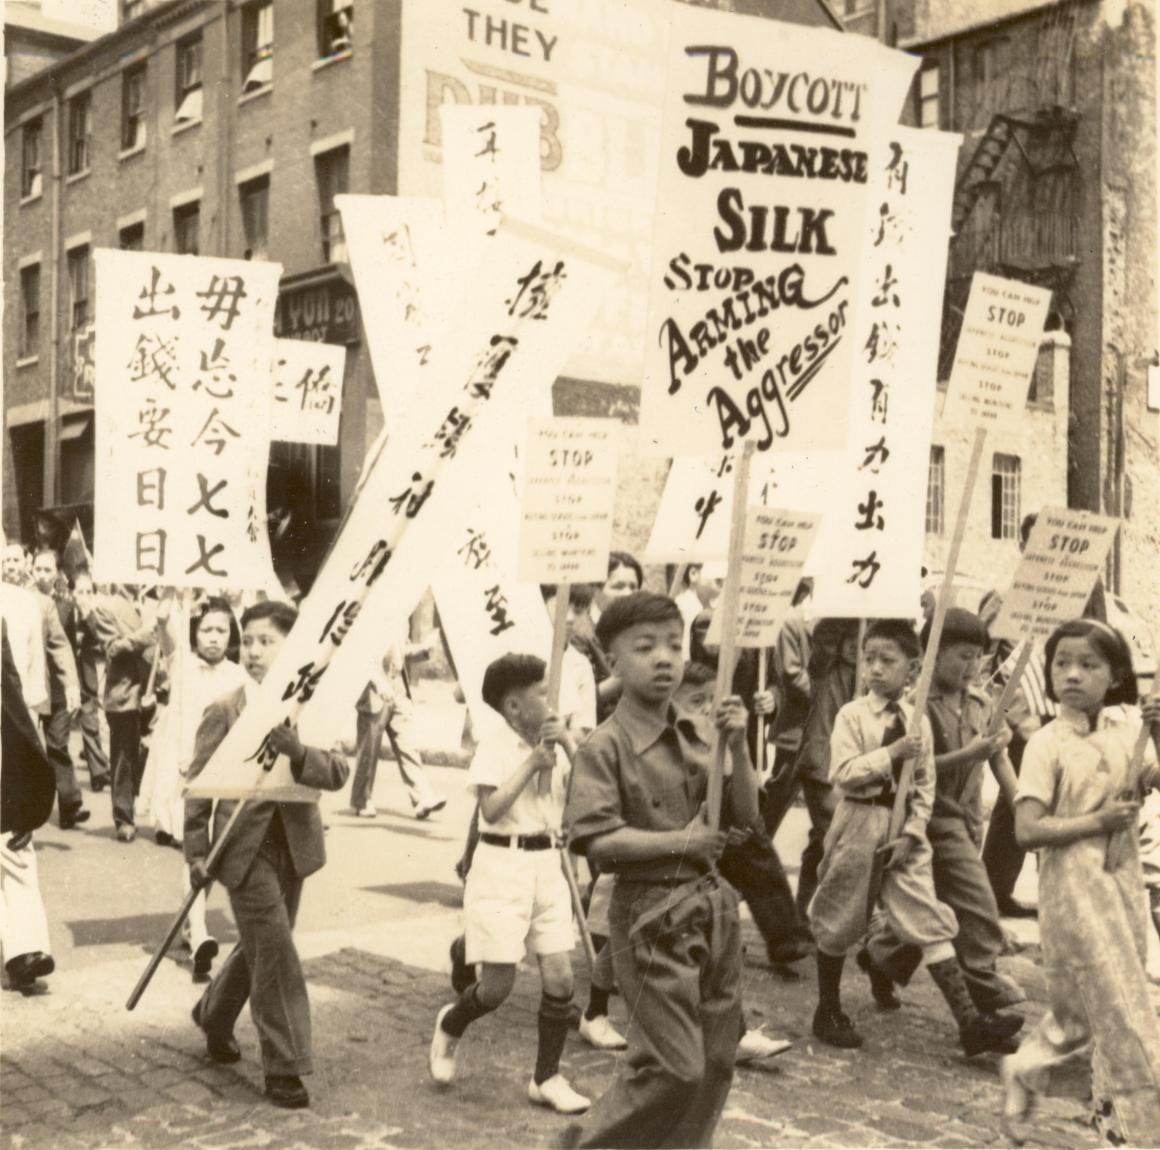 black and white image of young students holding signs in boycott of Japanese silk